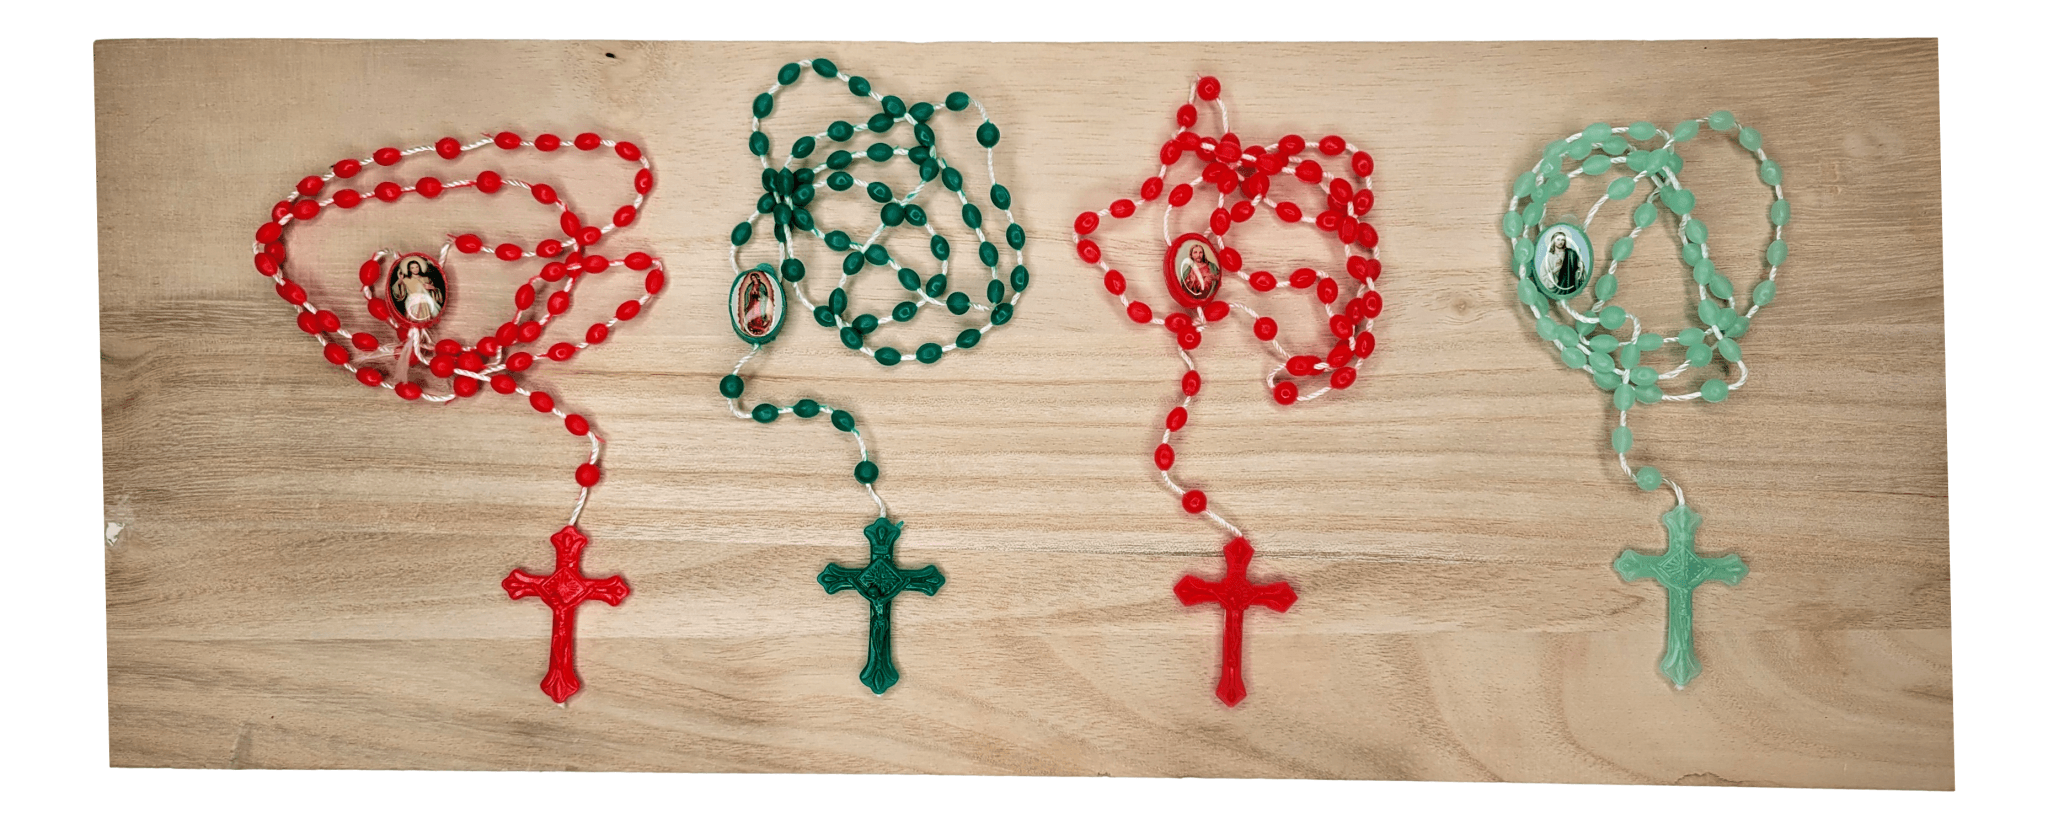 Rosary Beads Multiple Colors Multiple Religious Images Made in Italy Length 17 inches - Ysleta Mission Gift Shop- VOTED El Paso's Best Gift Shop